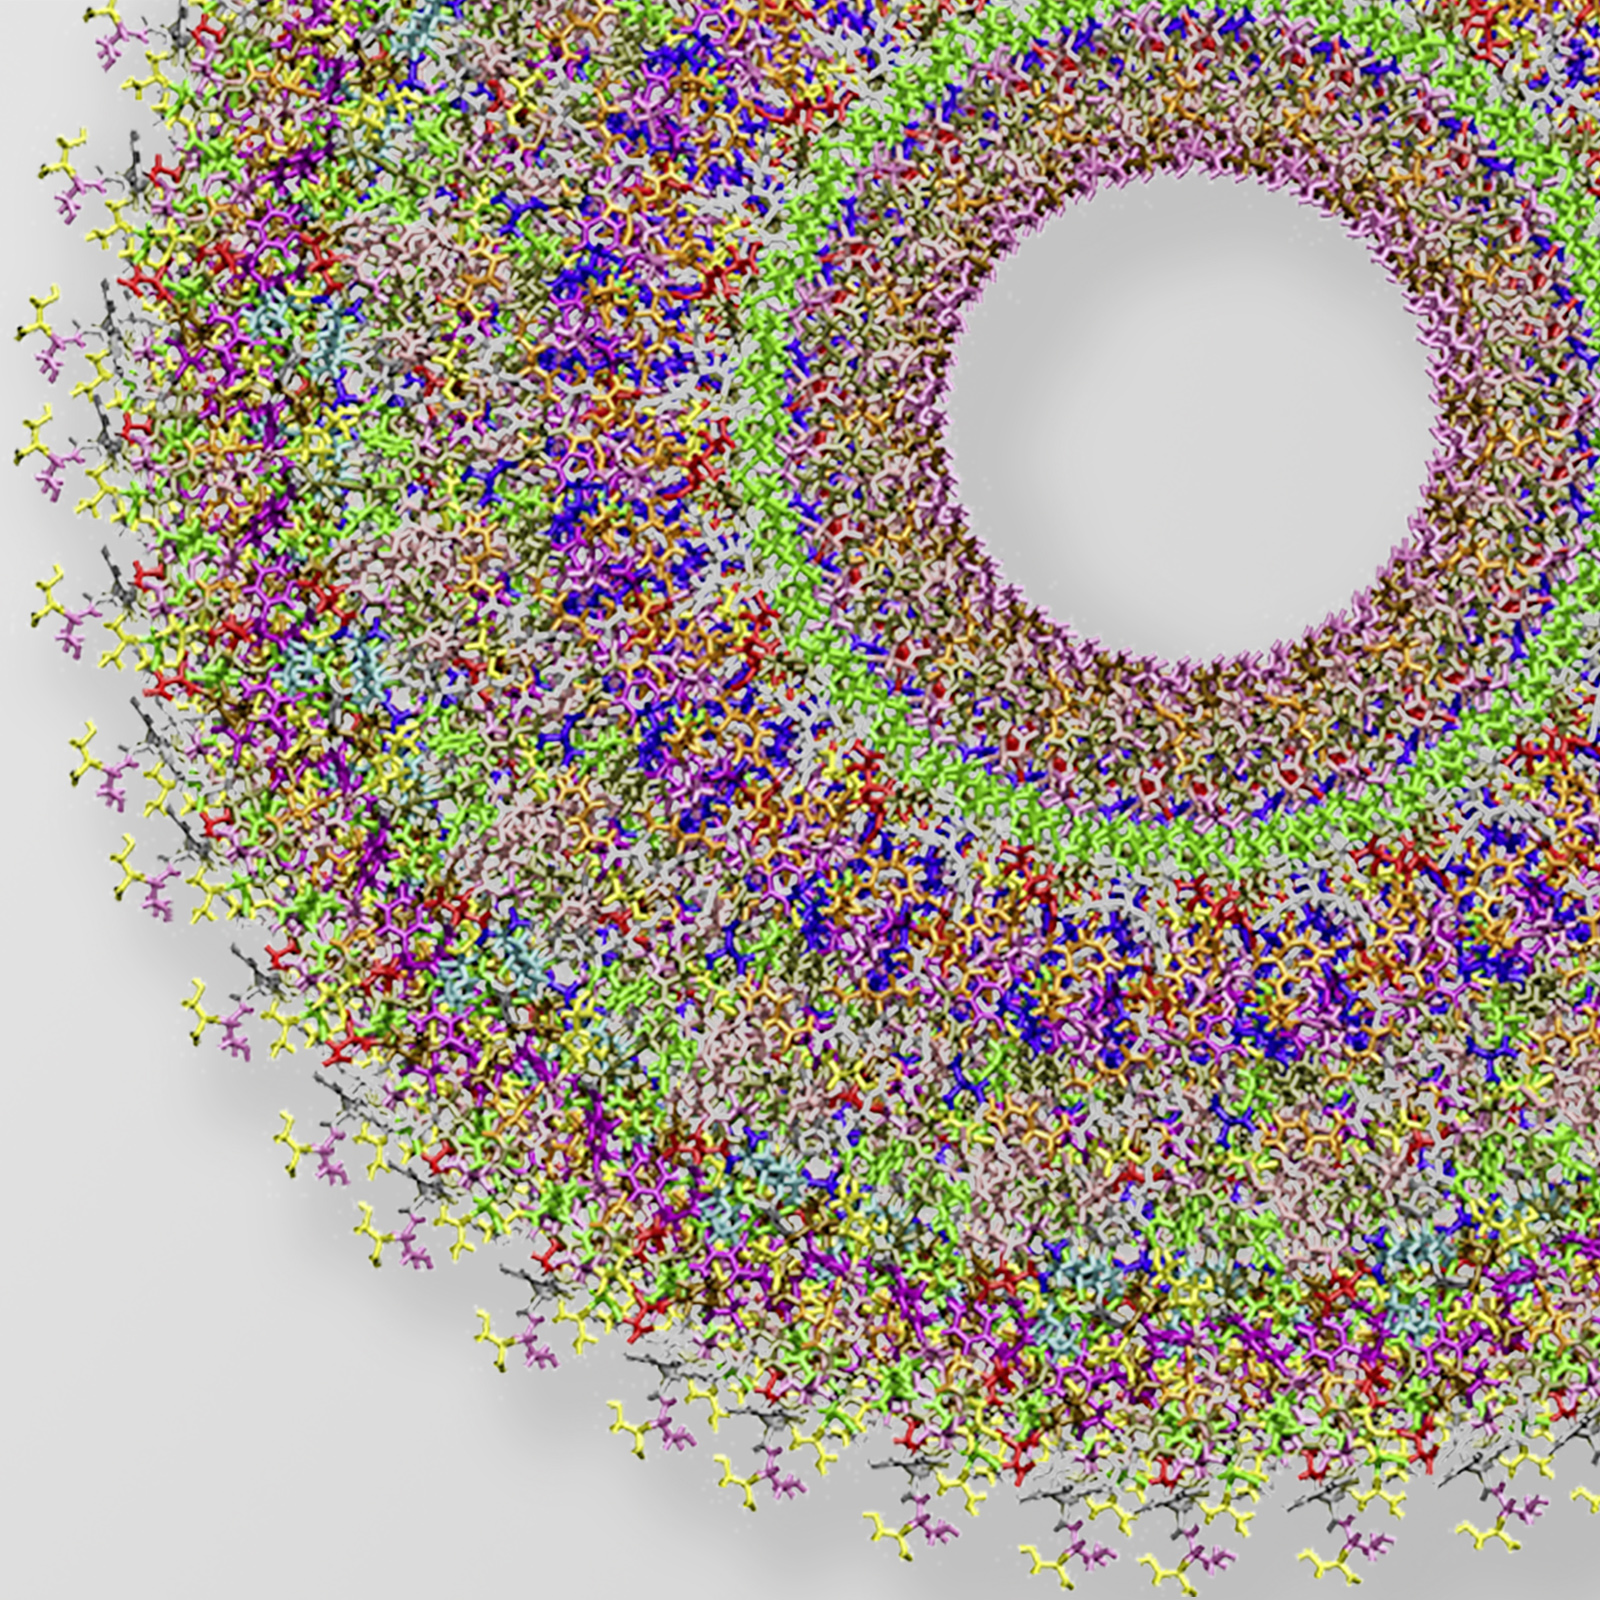 Even tiny objects can be depicted in detail: here an atomistic model of the tobacco mosaic virus. The tubular virus is about 300 nm long and 18 nm in diameter.